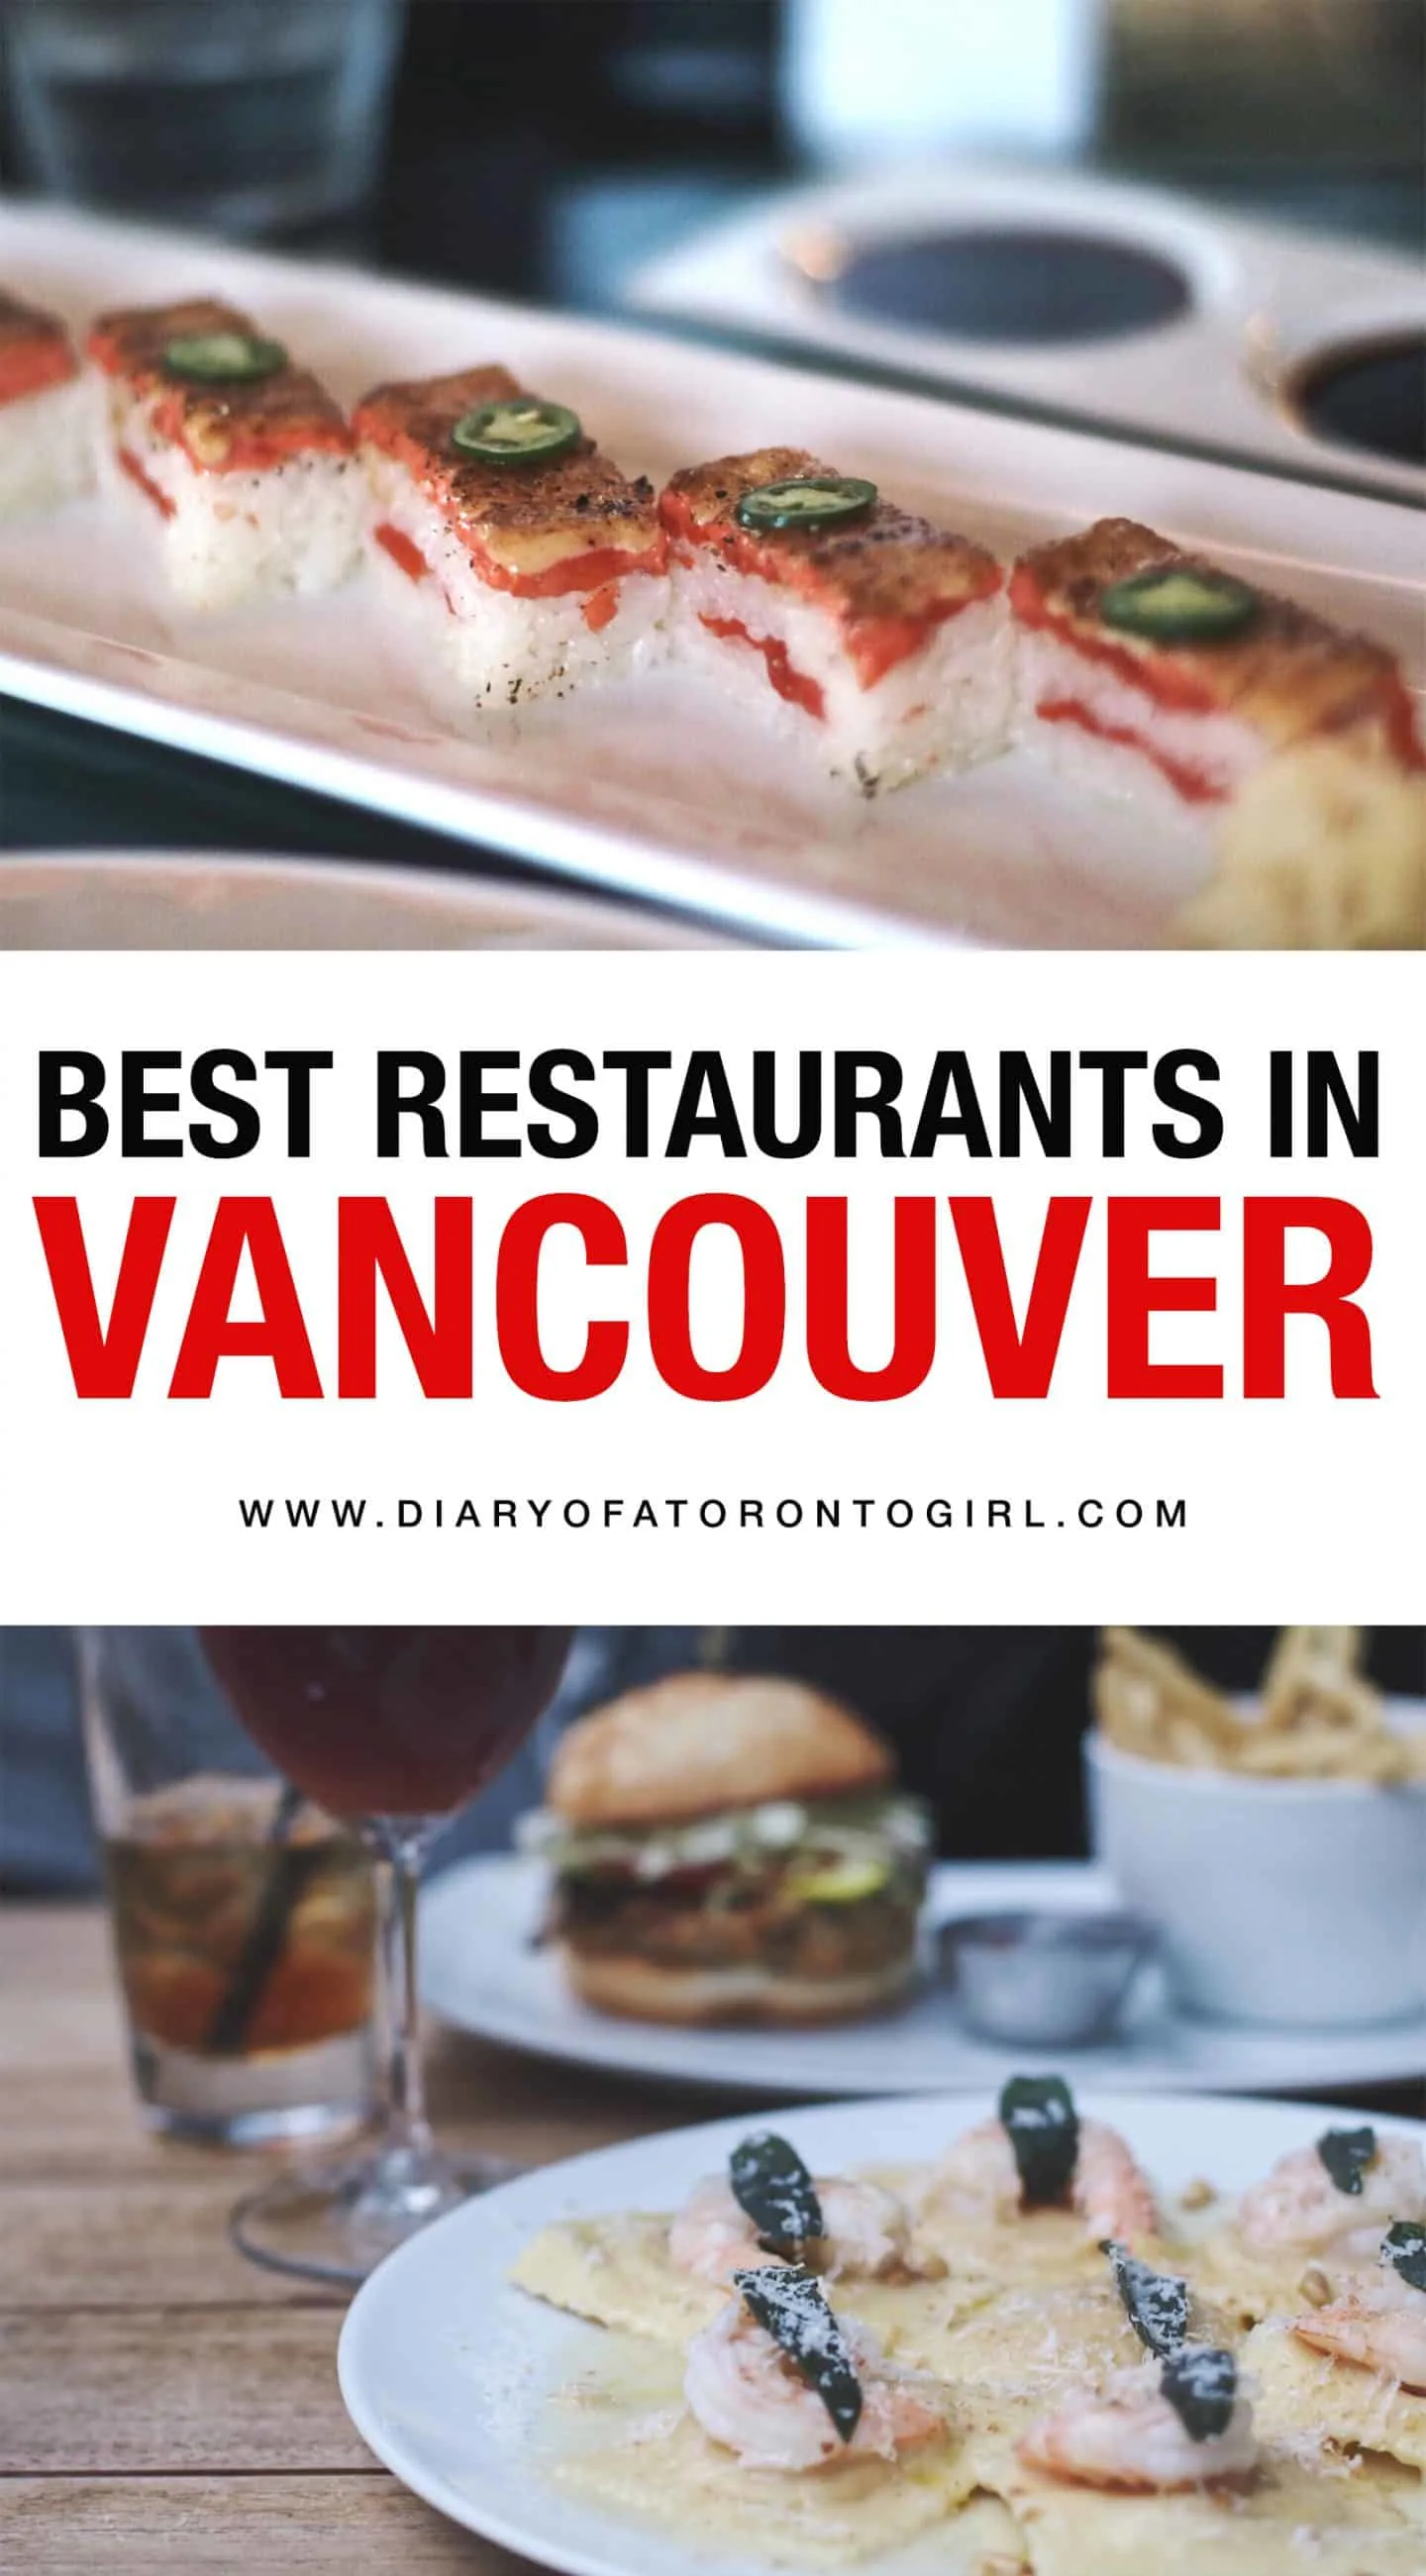 The ultimate guide on where to eat and drink in Vancouver, British Columbia, no matter what type of cuisine you're into!